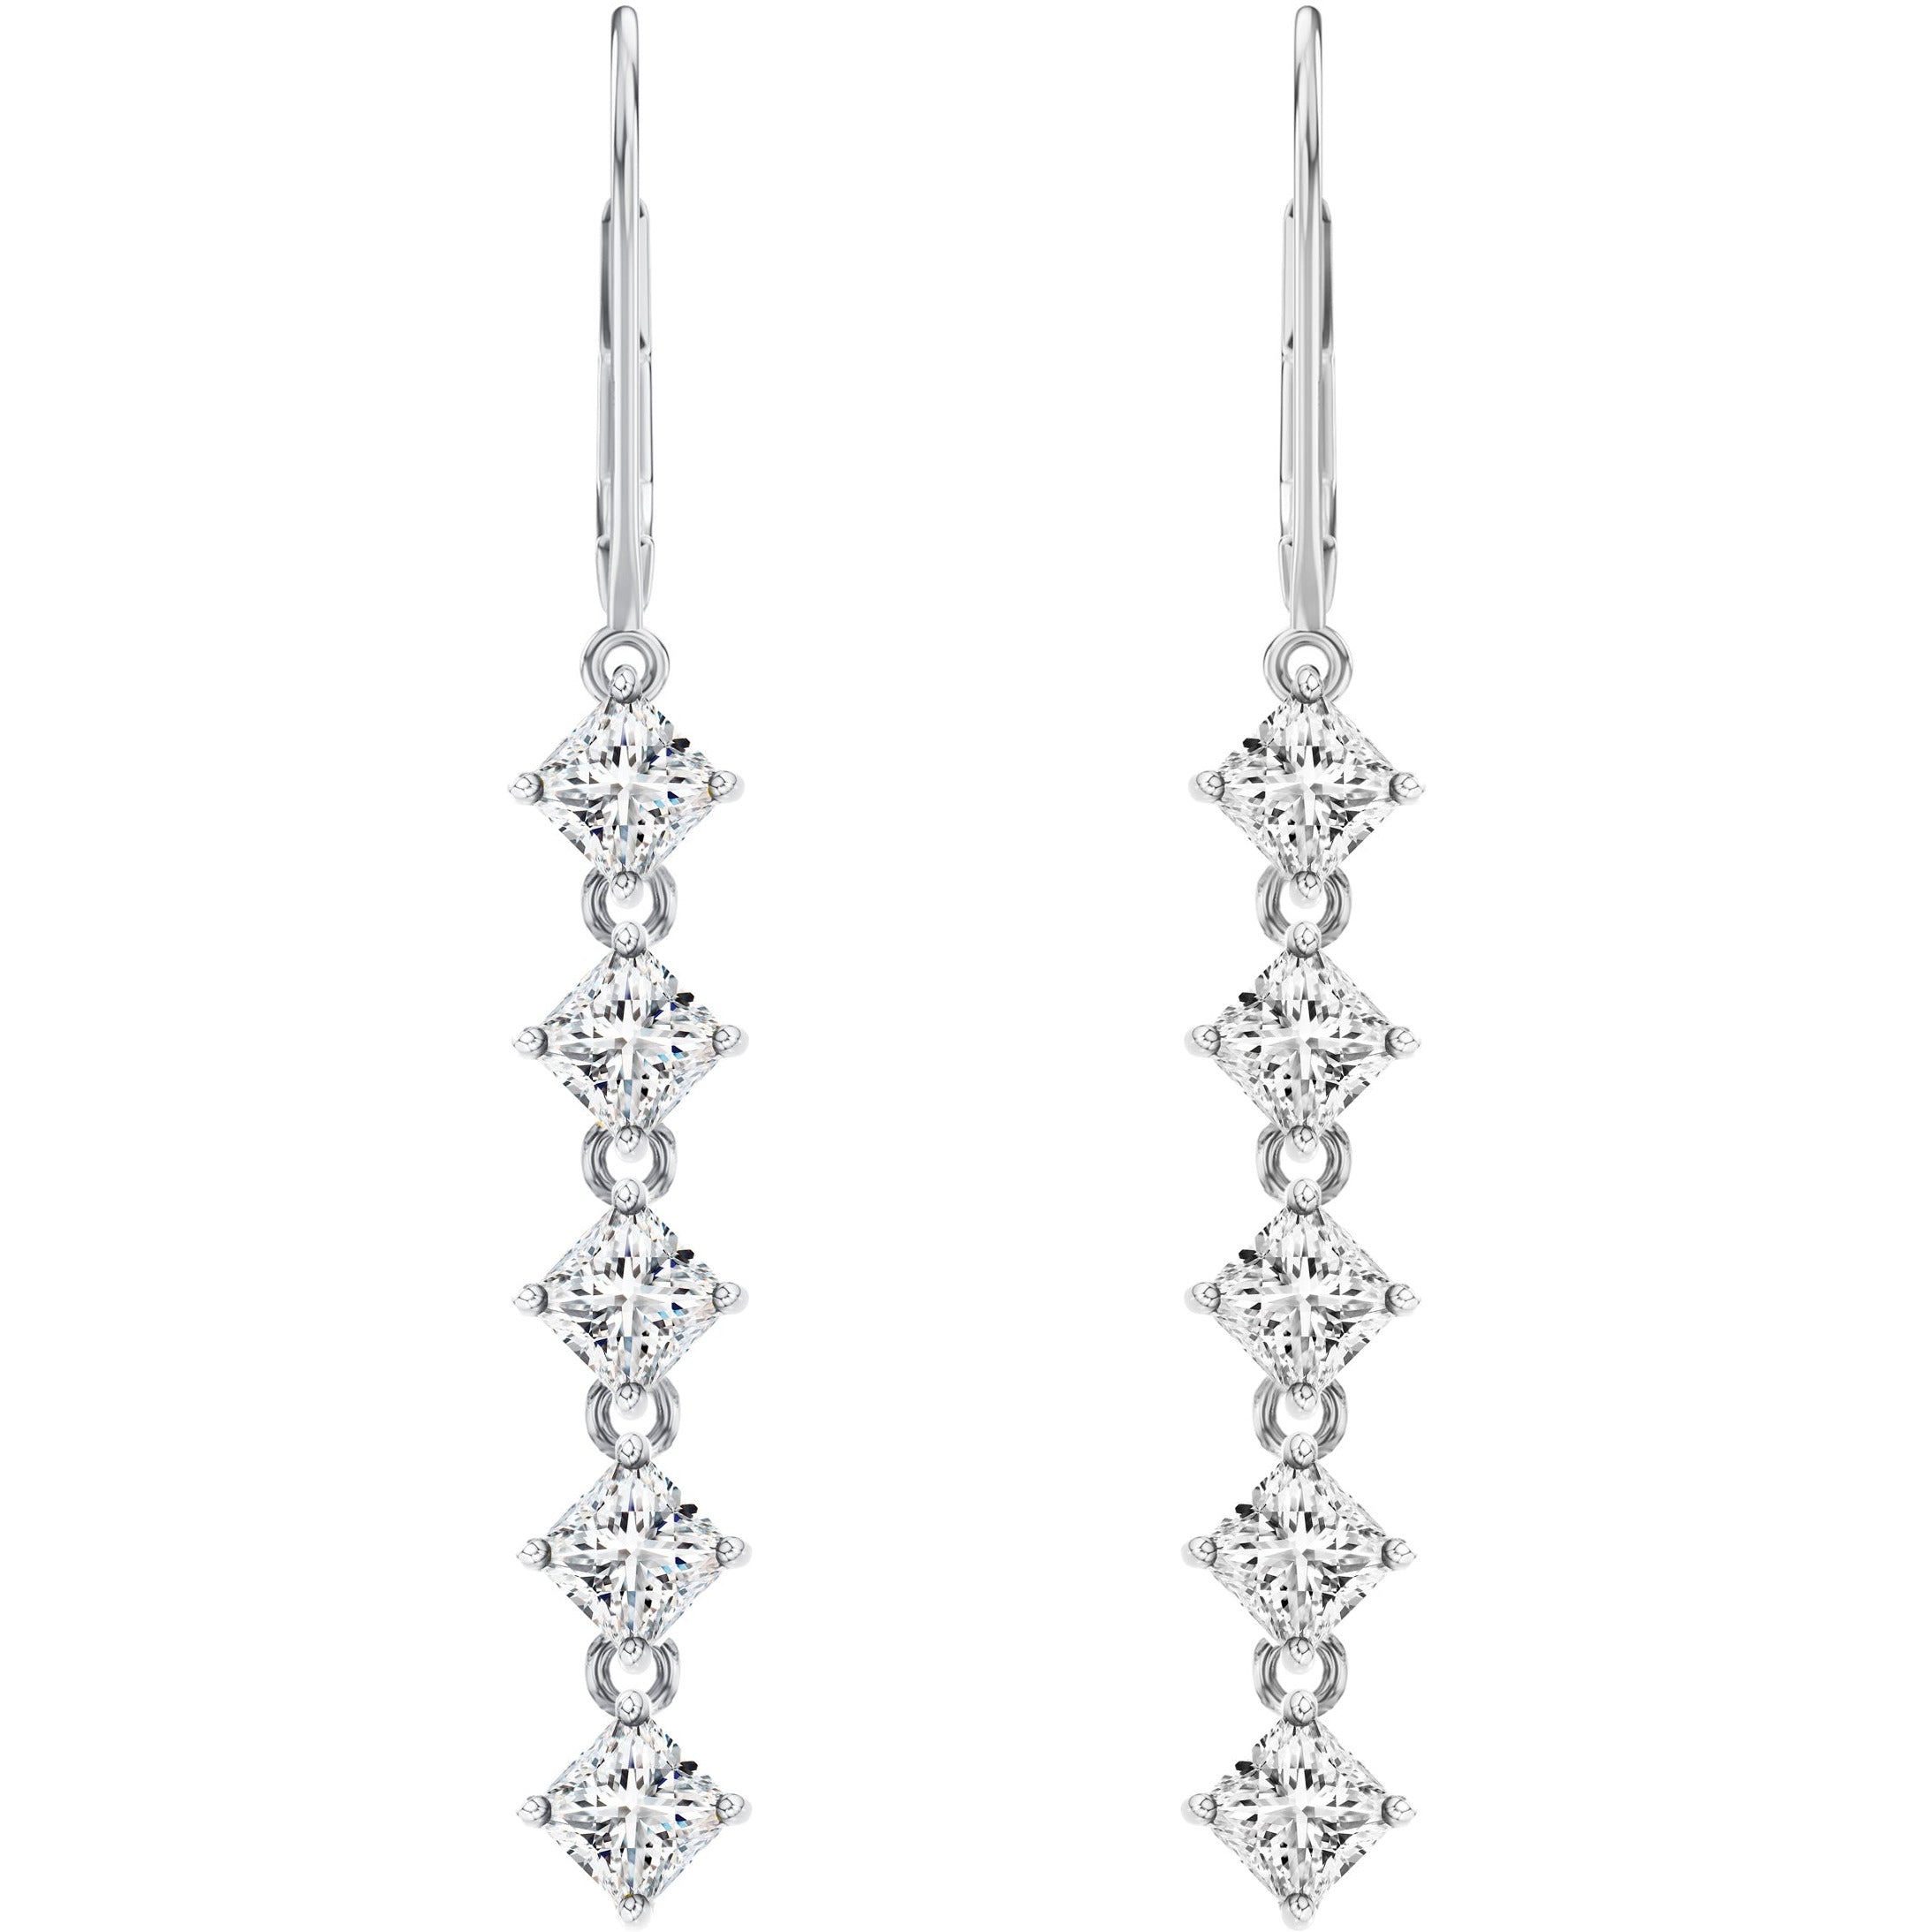 Shimansky - My Girl 10 Drop Diamond Earrings 1.00ct Crafted in 14K White Gold